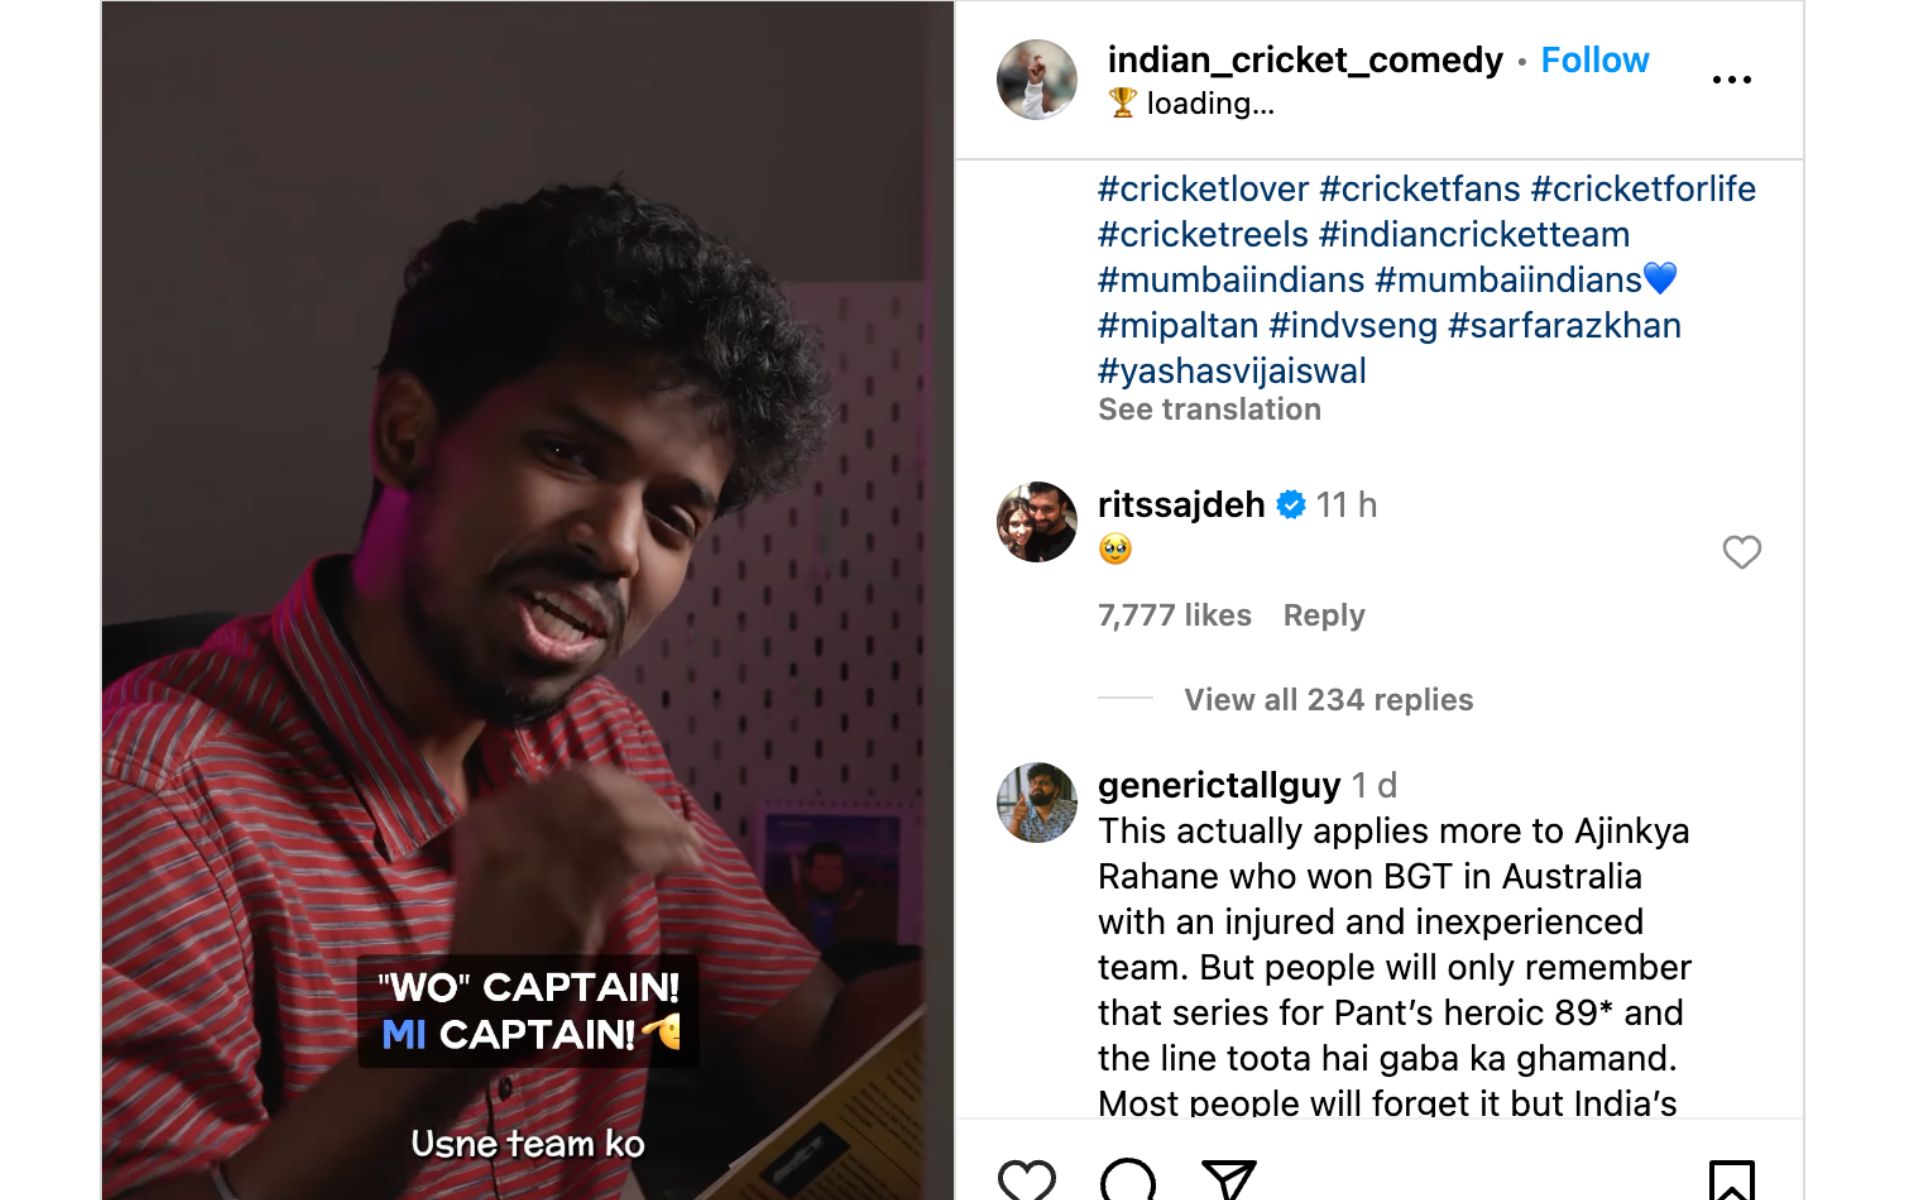 Ritika Sajdeh's 'Melting' Reply On Fan Video Lauding 'Selfless Captain' Rohit Sharma